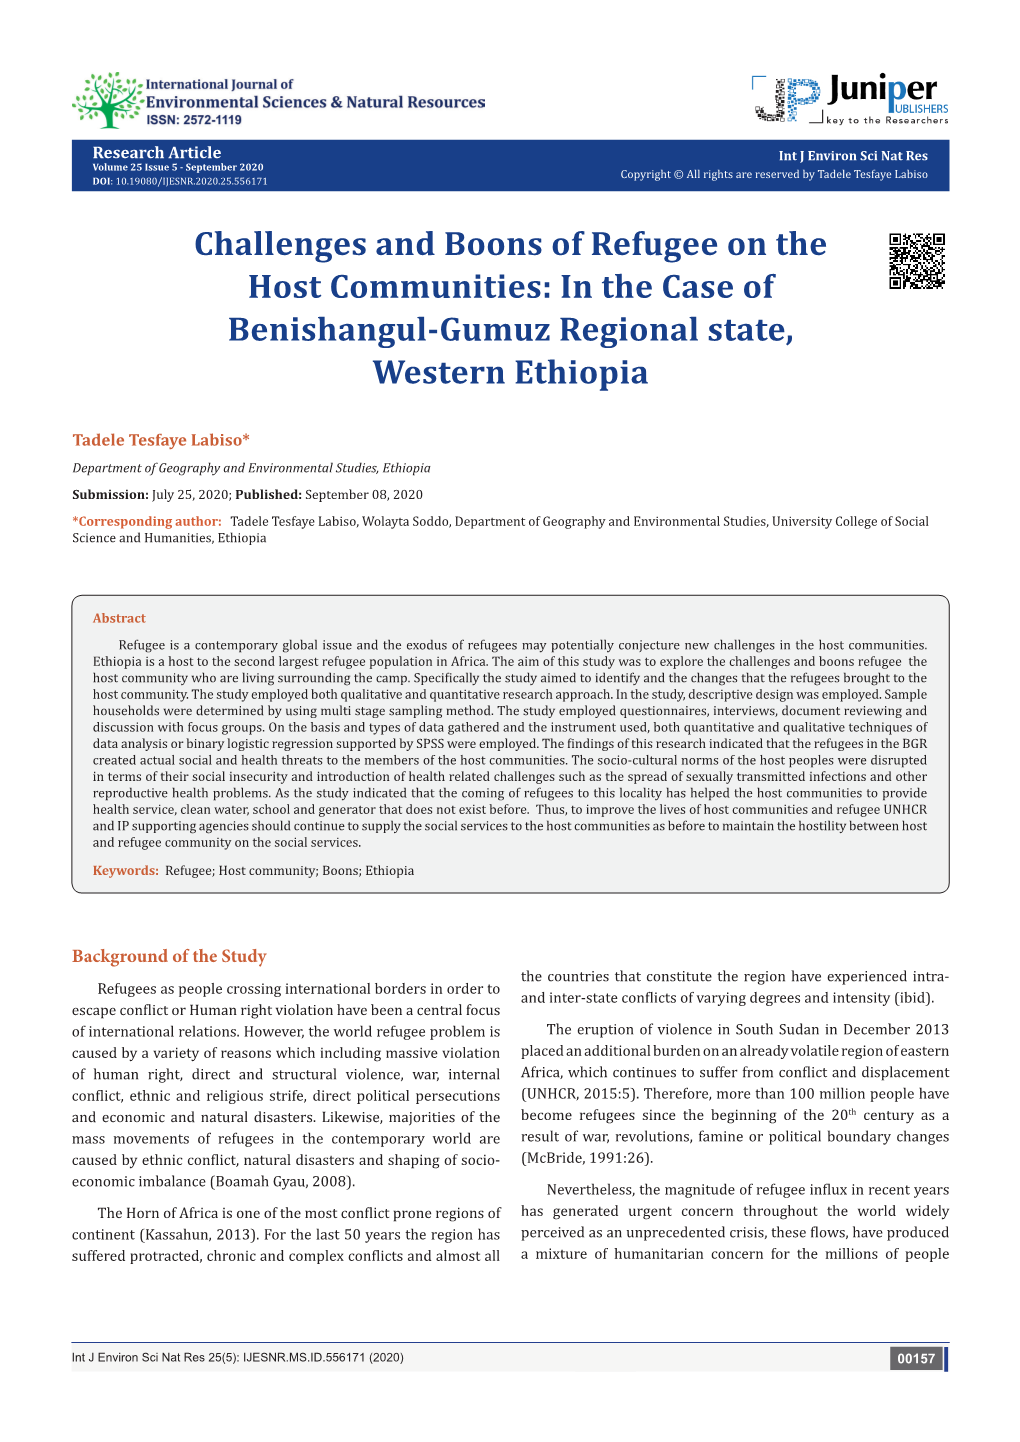 Challenges and Boons of Refugee on the Host Communities: in the Case of Benishangul-Gumuz Regional State, Western Ethiopia